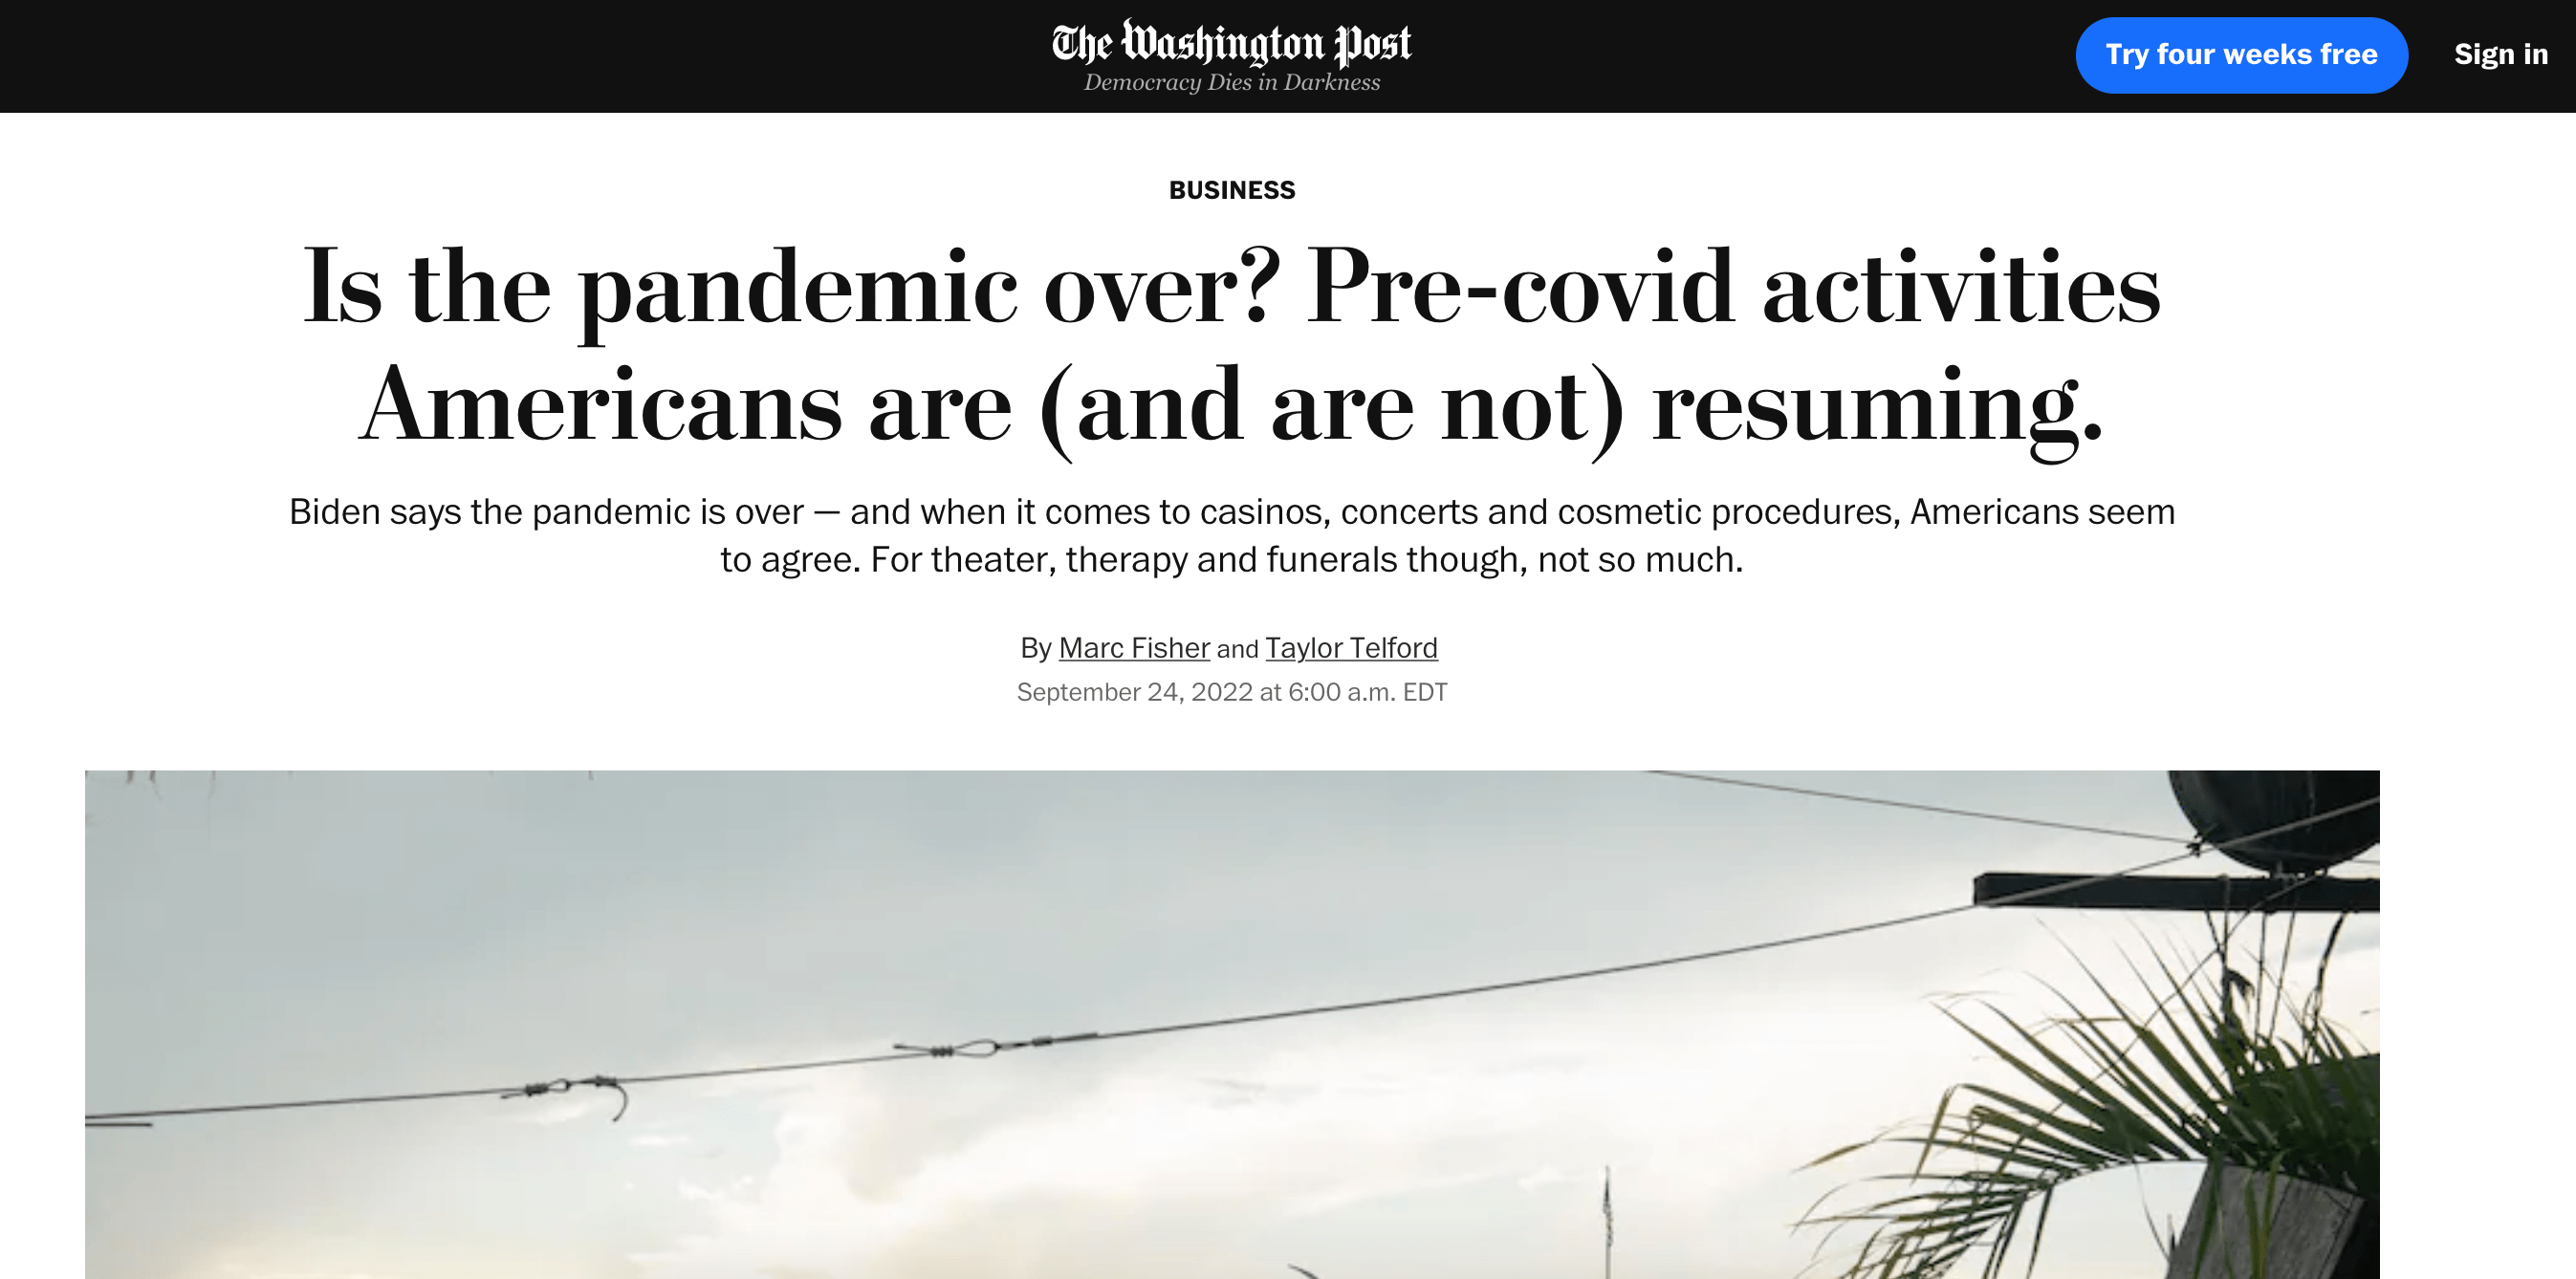 The Washington Post September 2022 - Is the pandemic over?